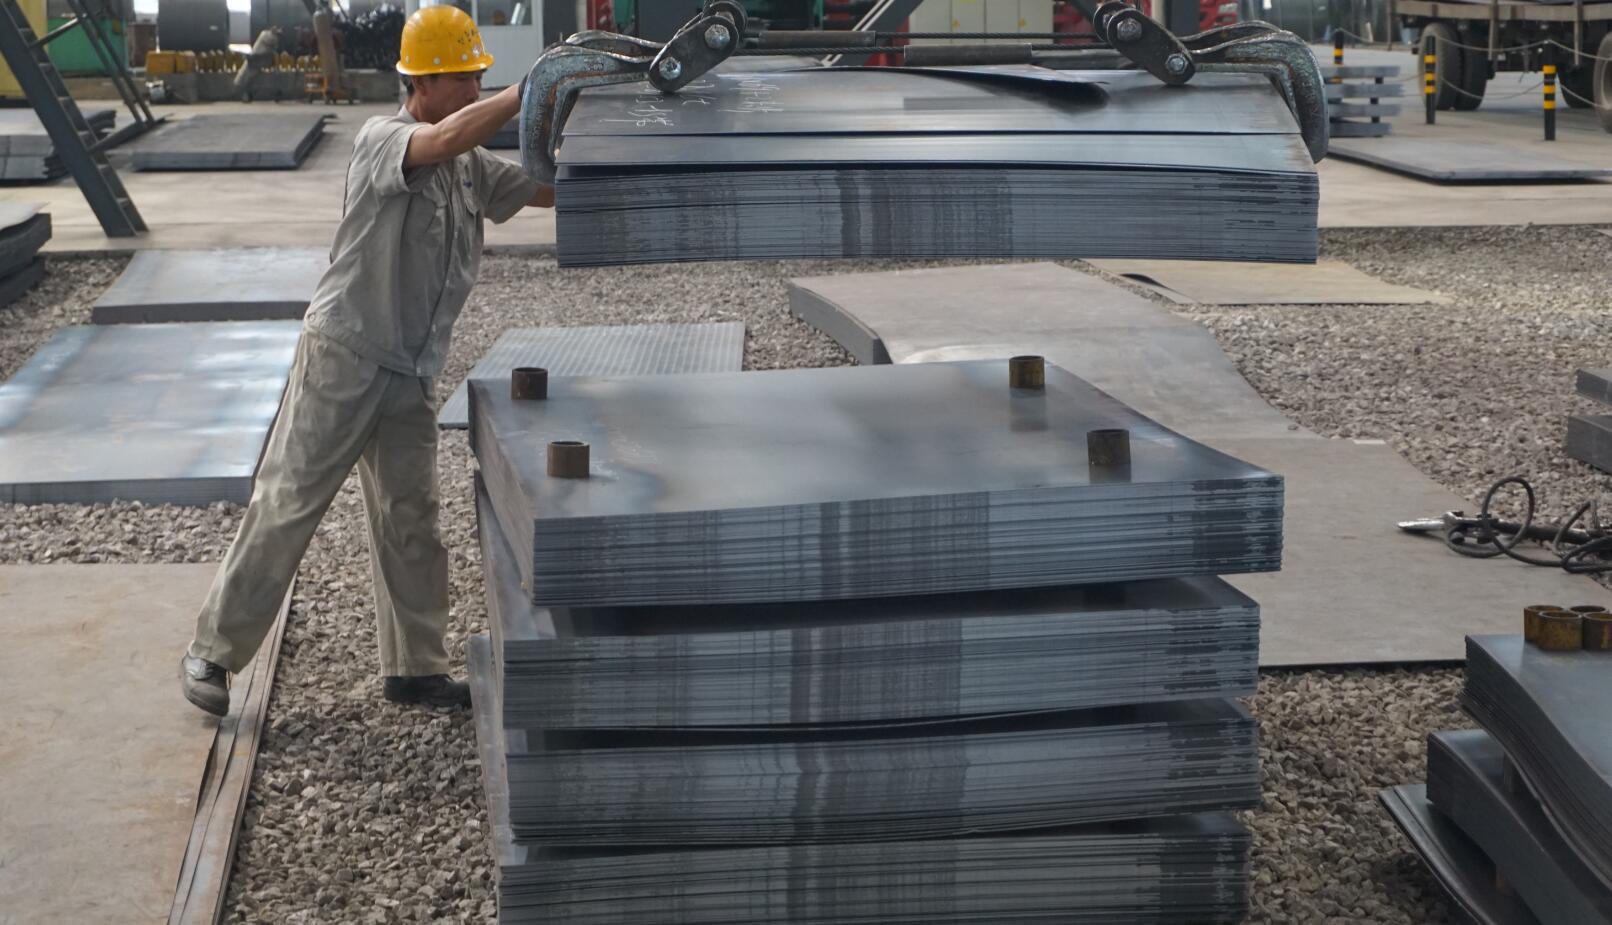 thickness tolerance for steel plate